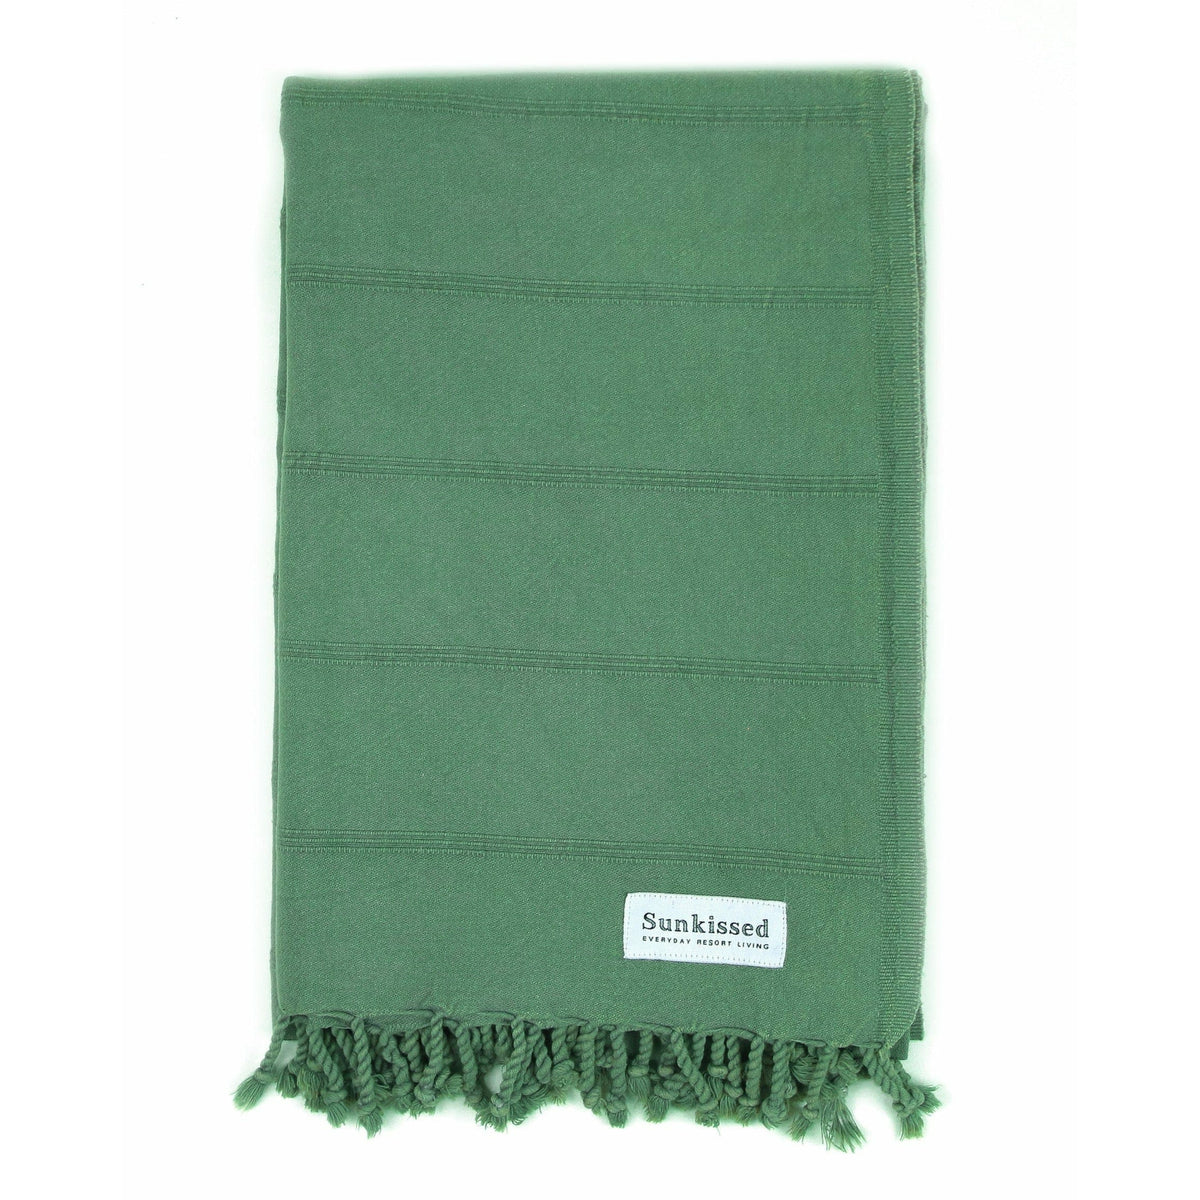 Sunkissed English Green / L • 100cm x 180cm • 40&quot;W x 72&quot;L Tenerife • Sand Free Beach Towel by Sunkissed